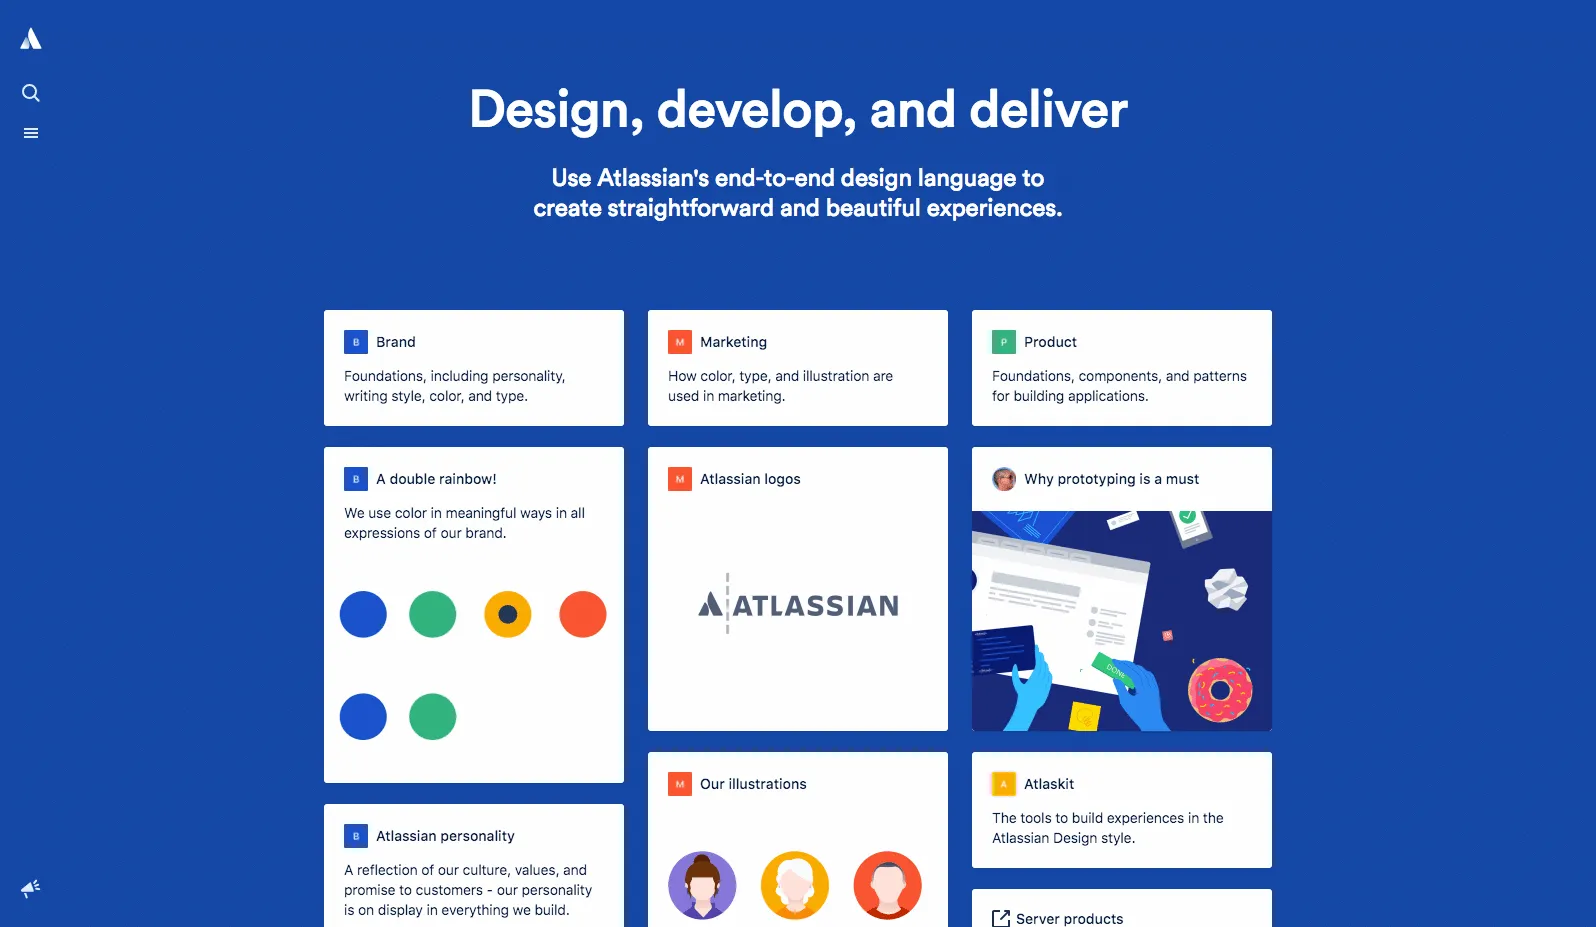 Our new home for Atlassian Design System   by jennie  yip  Designing  Atlassian  Medium